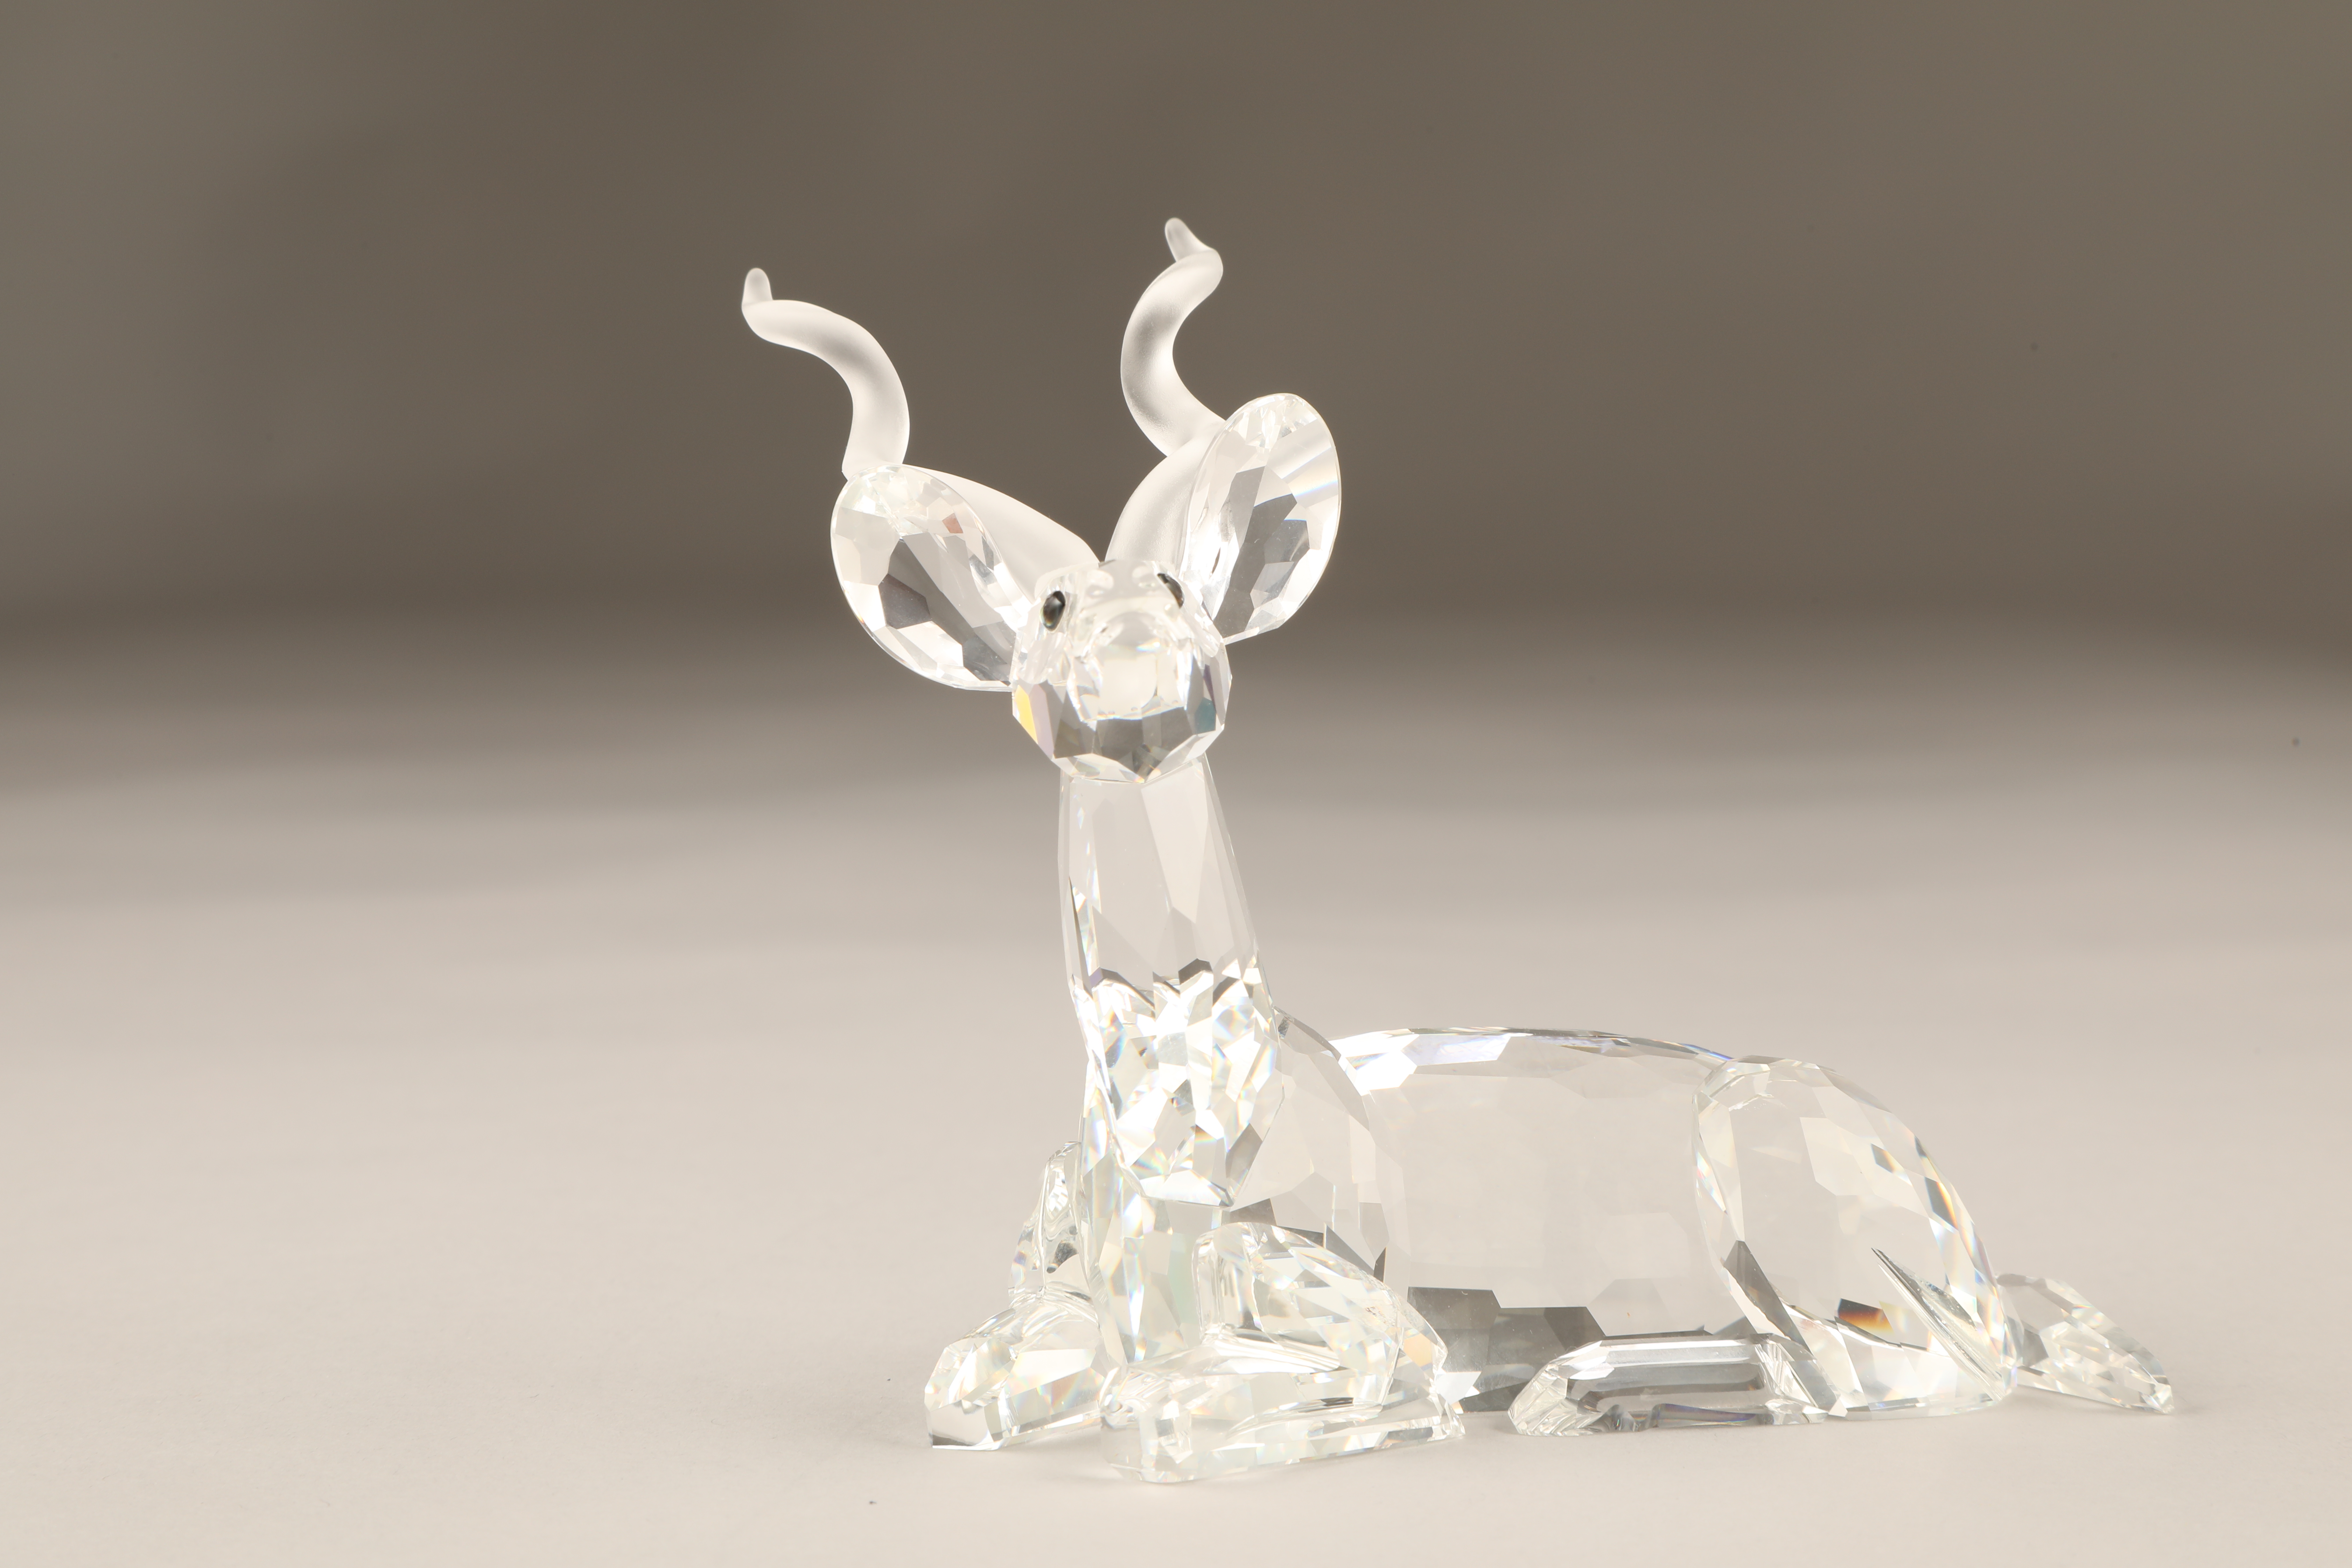 Swarovski crystal figure, 'Inspiration Africa' Kudu, boxed with papers. 10cm long 9.5cm high